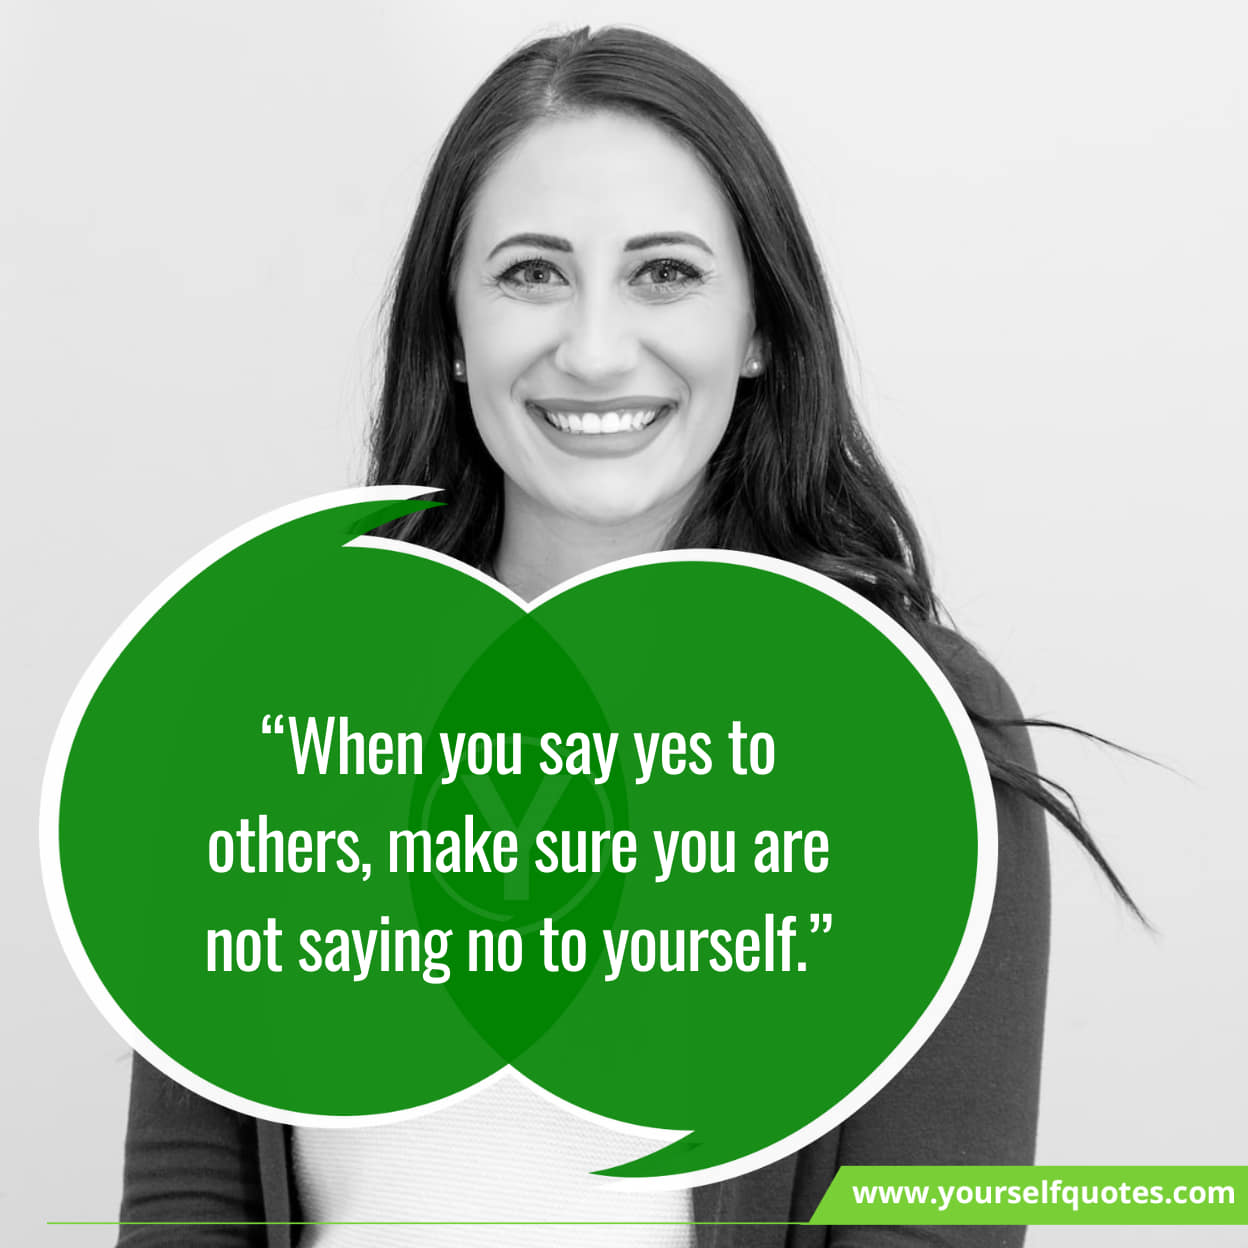 Best Famous Self-Respect Quotes